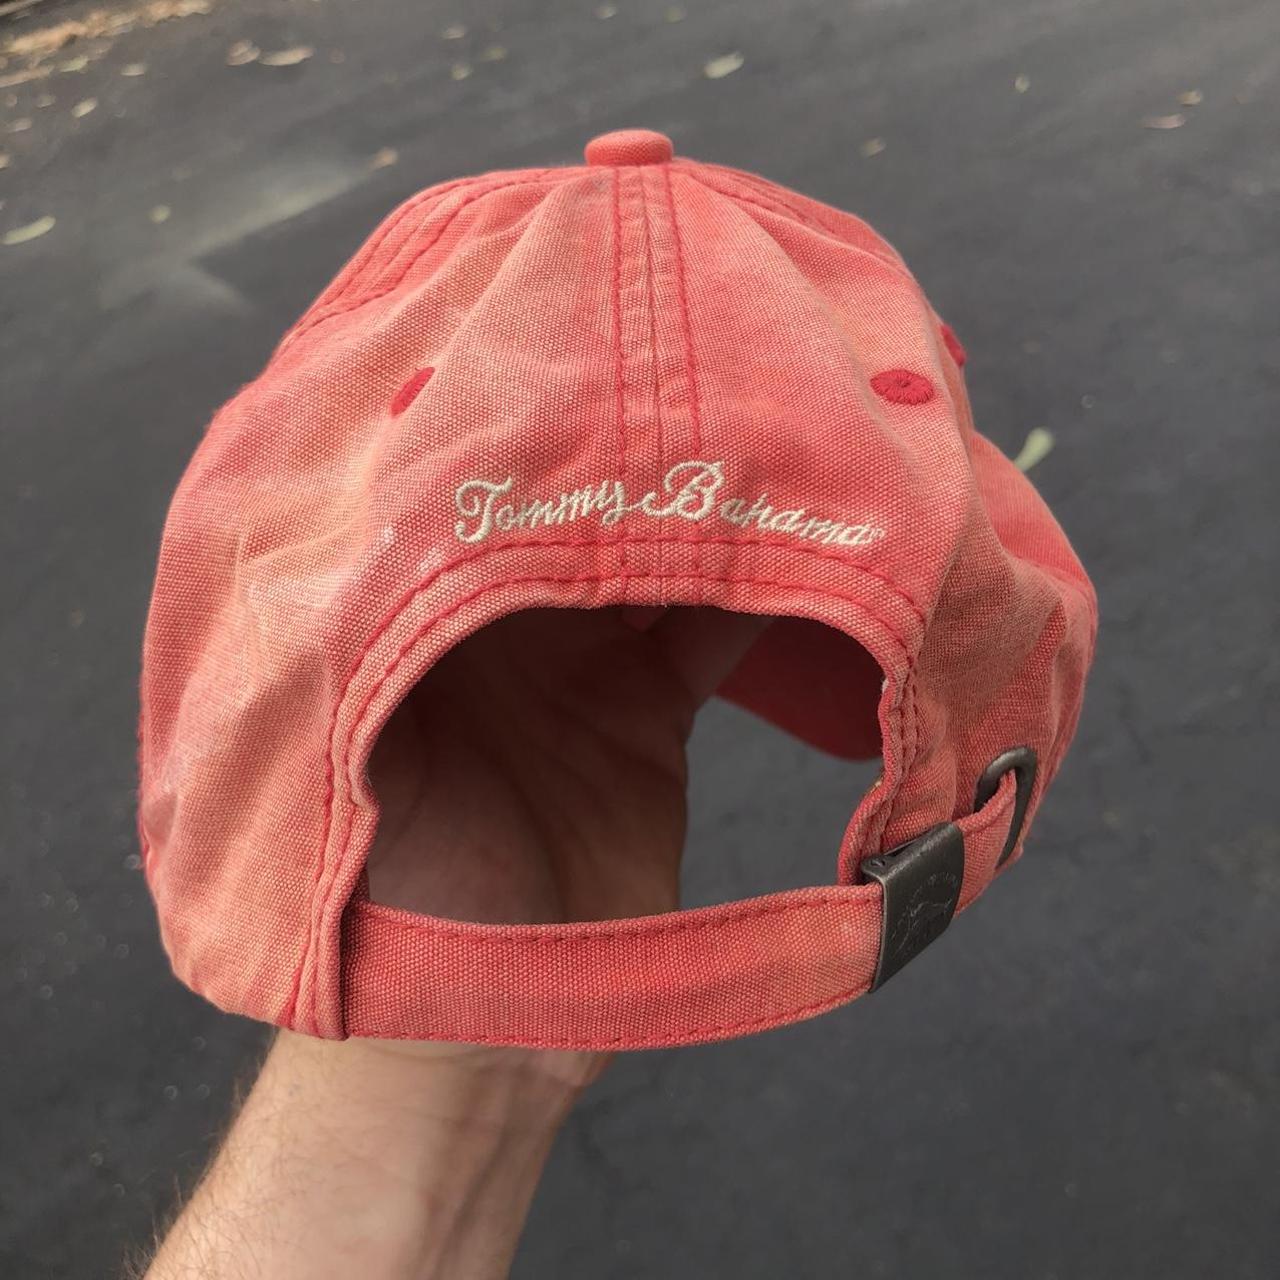 Tommy Bahama Relax Strap Back Hat Faded and worn - Depop